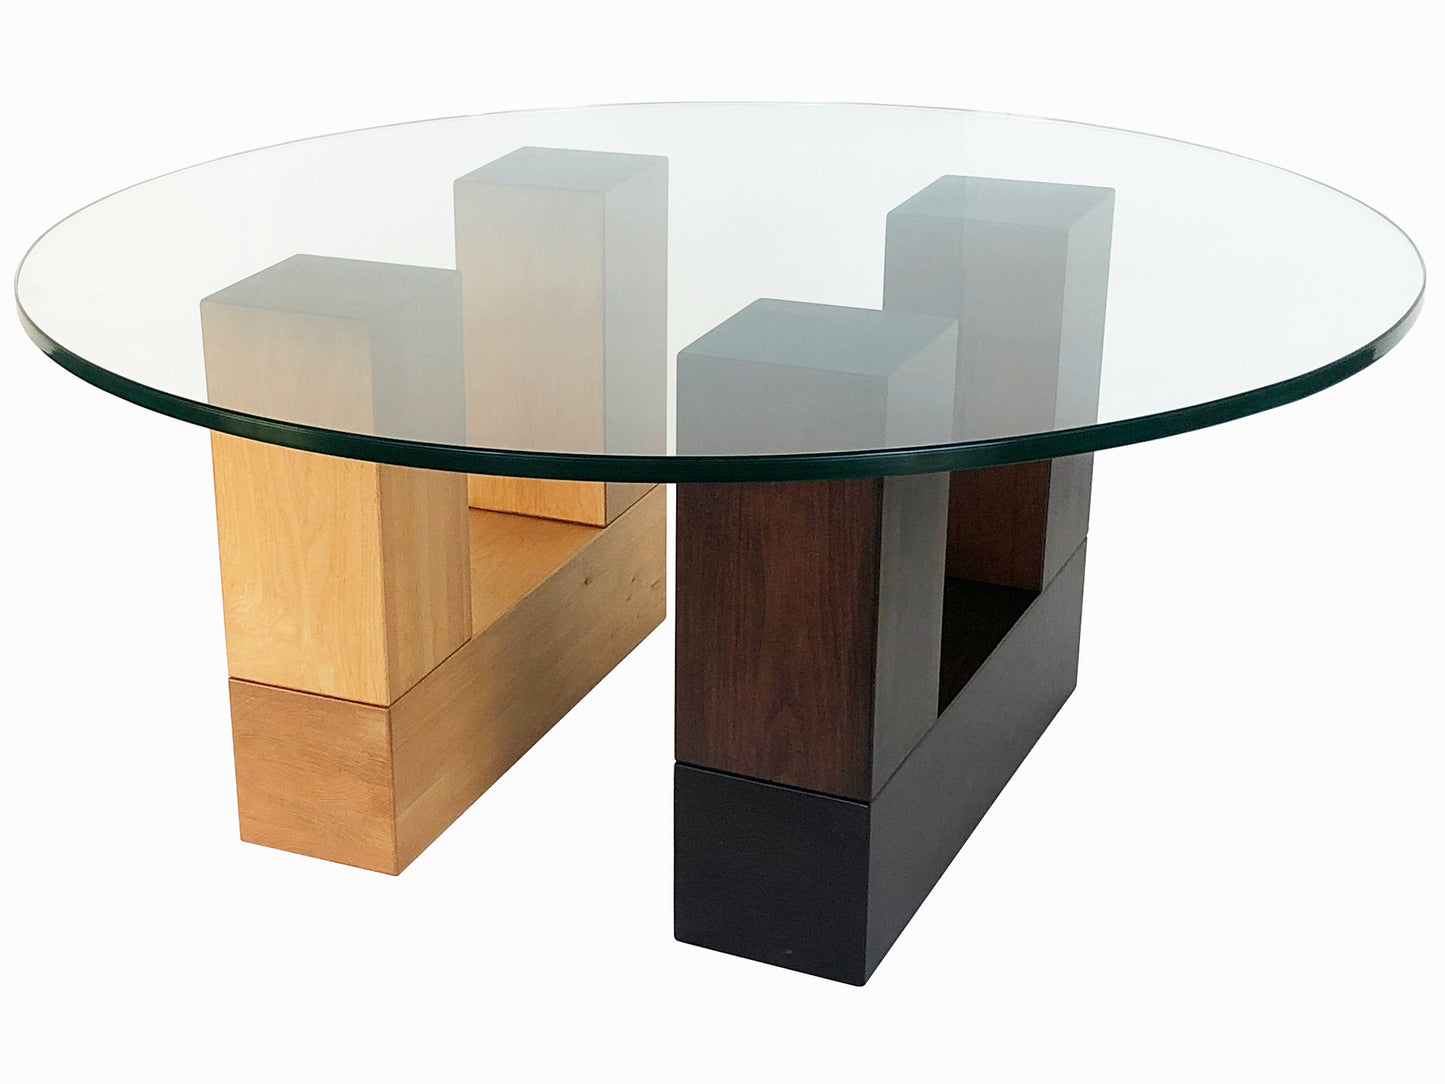 Tangent Round Coffee Table - alternative configuration 2 - see video